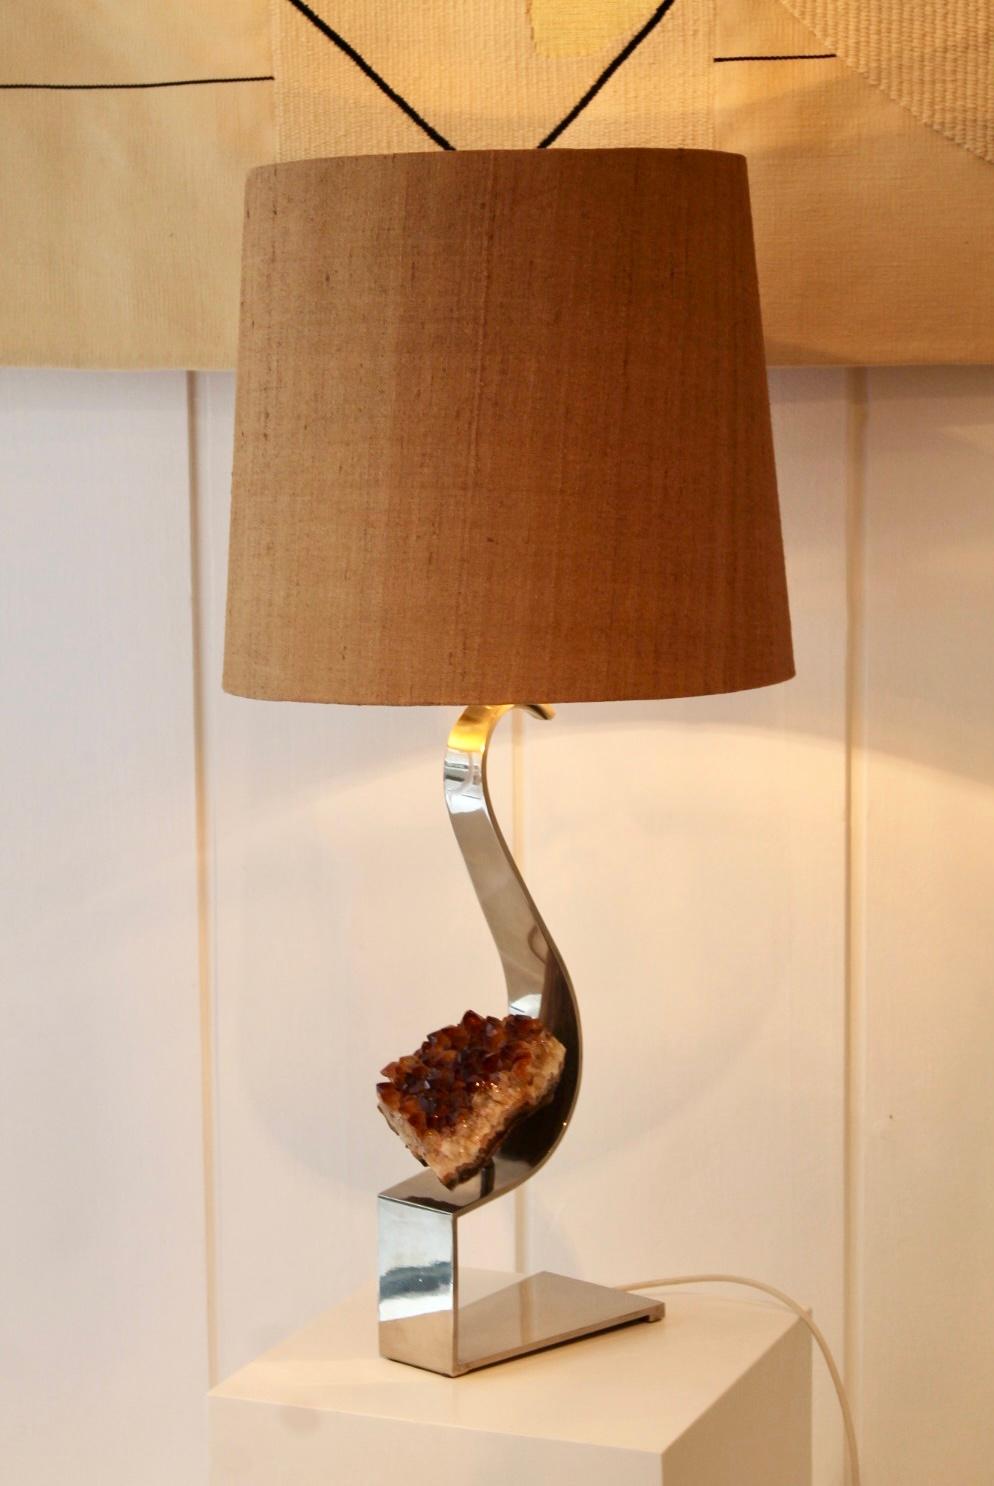 Lamp by Claude De Muzac, 1970s 
Steel and mounted pyrite rock lamp
Good vintage condition
Brand new shade.